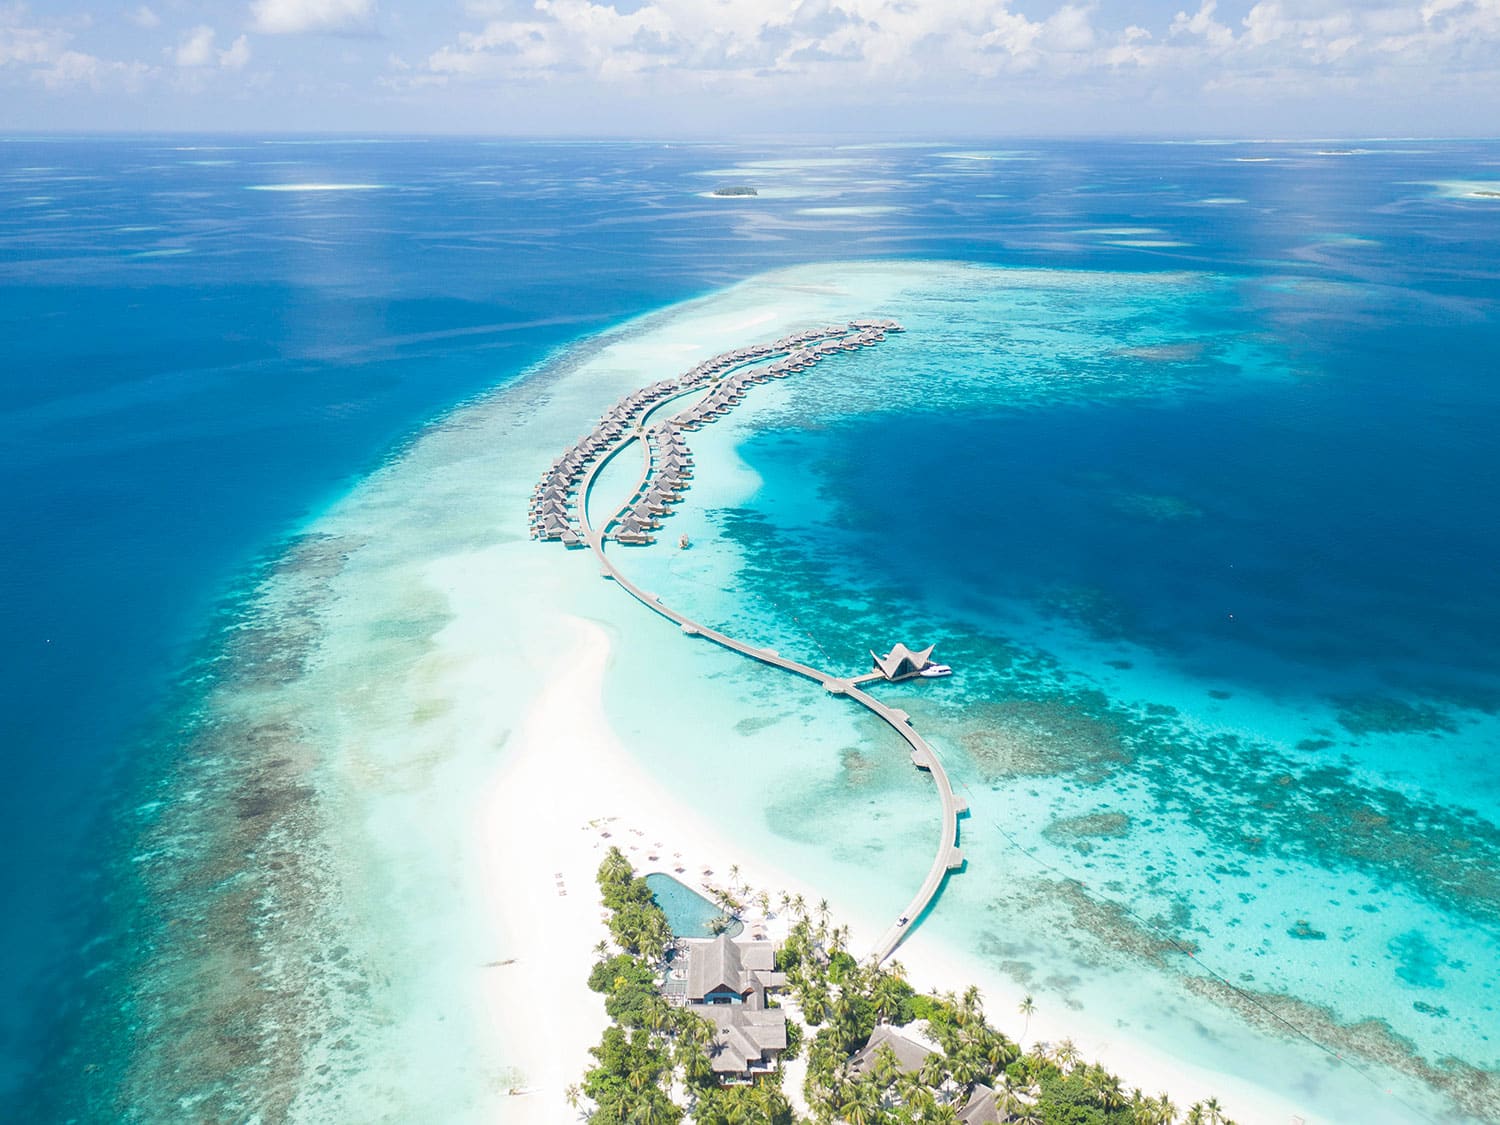 Aerial view of a tropical island in the Maldives.